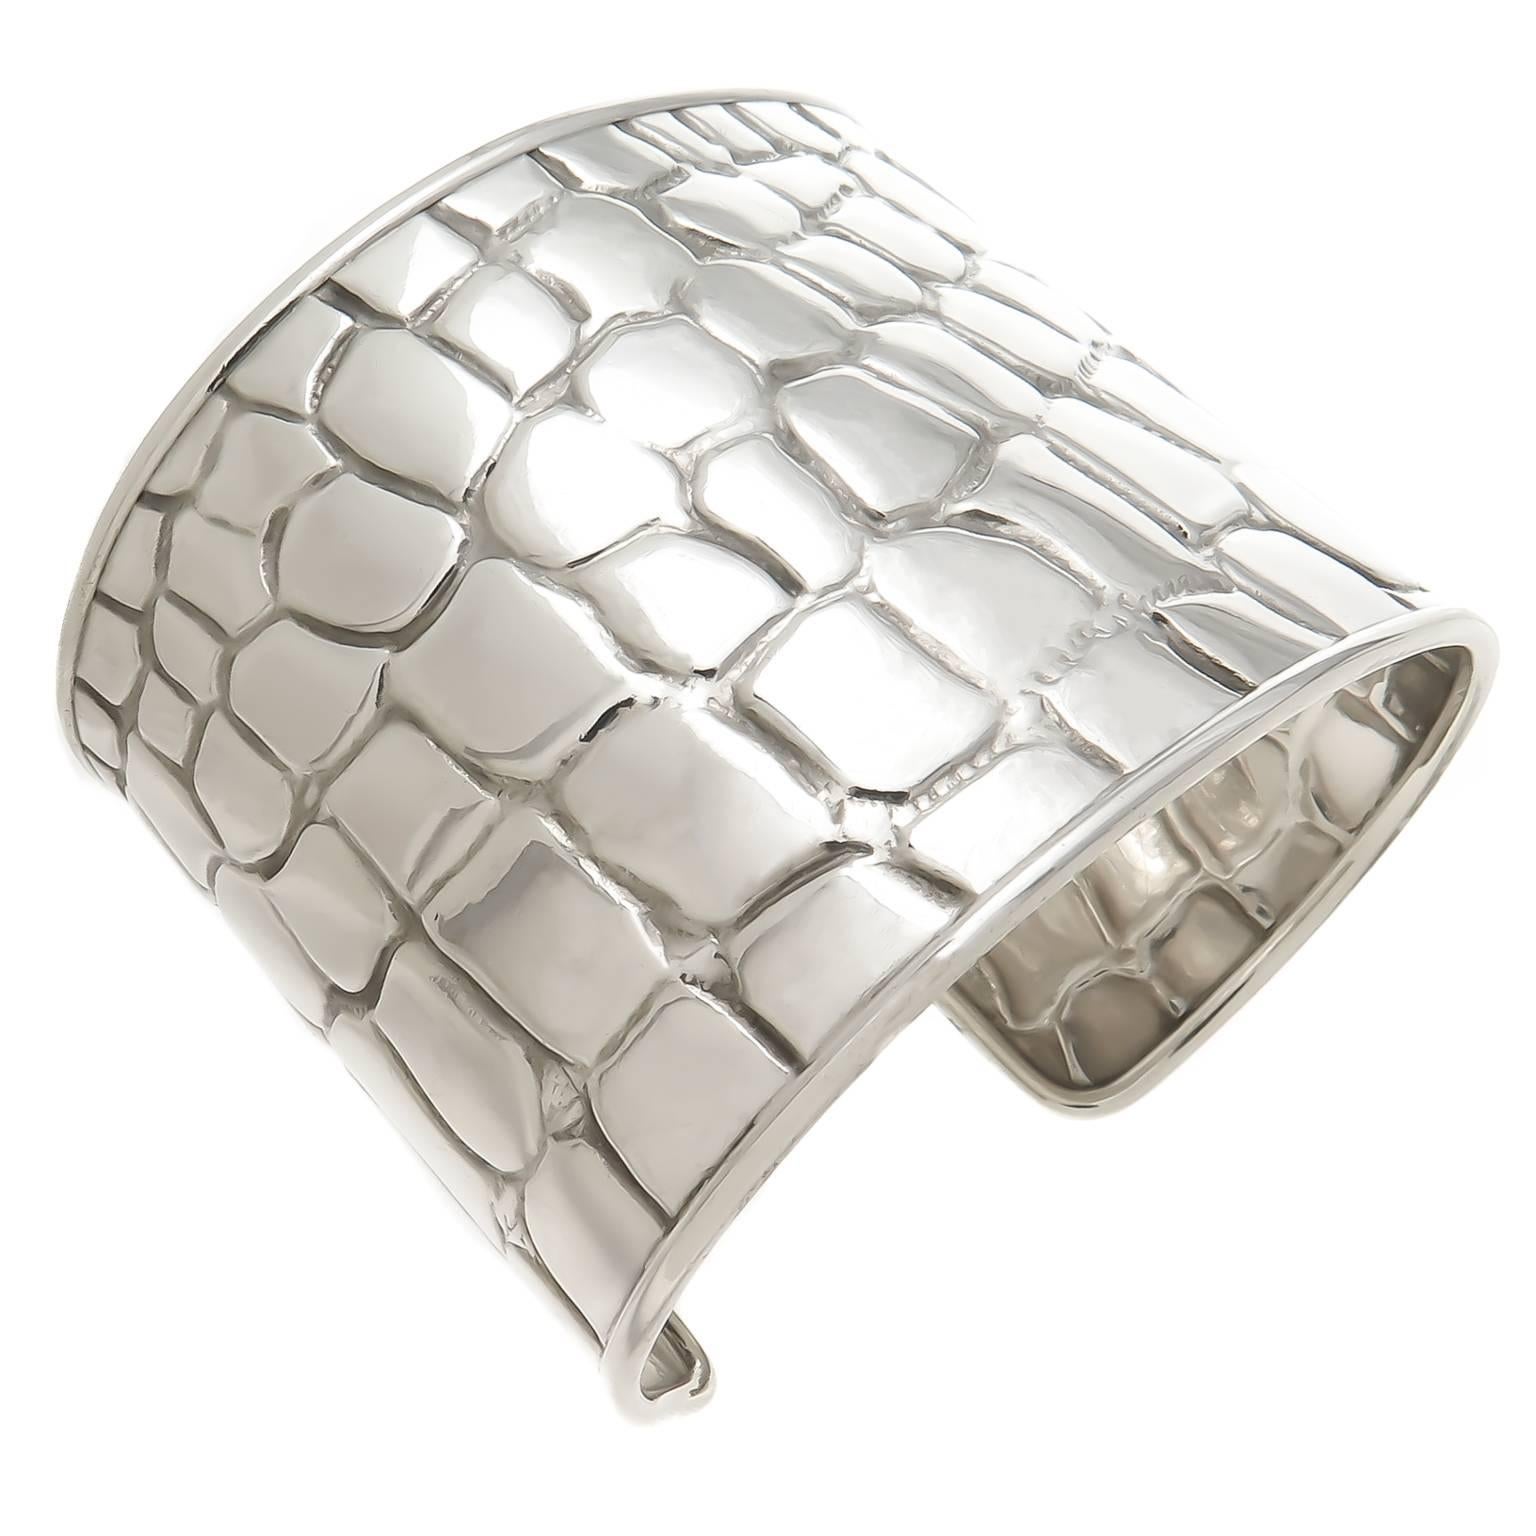 Circa 2000 Tiffany & Company Sterling Silver wide Cuff bracelet with a Crocodile textured pattern. Measuring 2 inch wide and having a wrist opening of 1 1/4 inch that can be adjusted to fit most any wrist. Comes in original Tiffany Gift box.